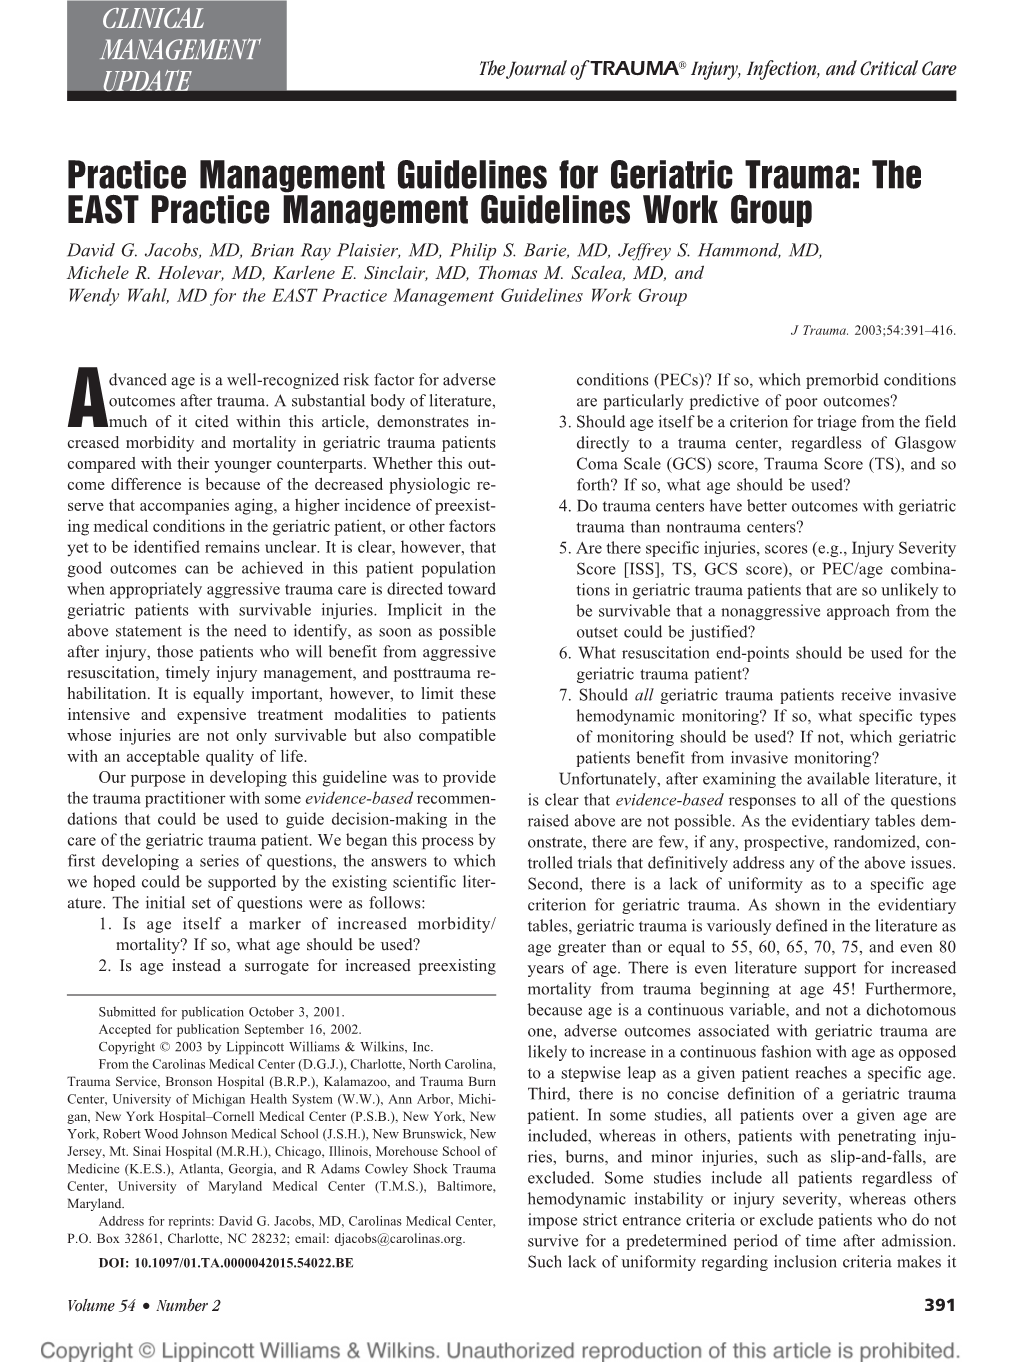 Practice Management Guidelines for Geriatric Trauma: the EAST Practice Management Guidelines Work Group David G